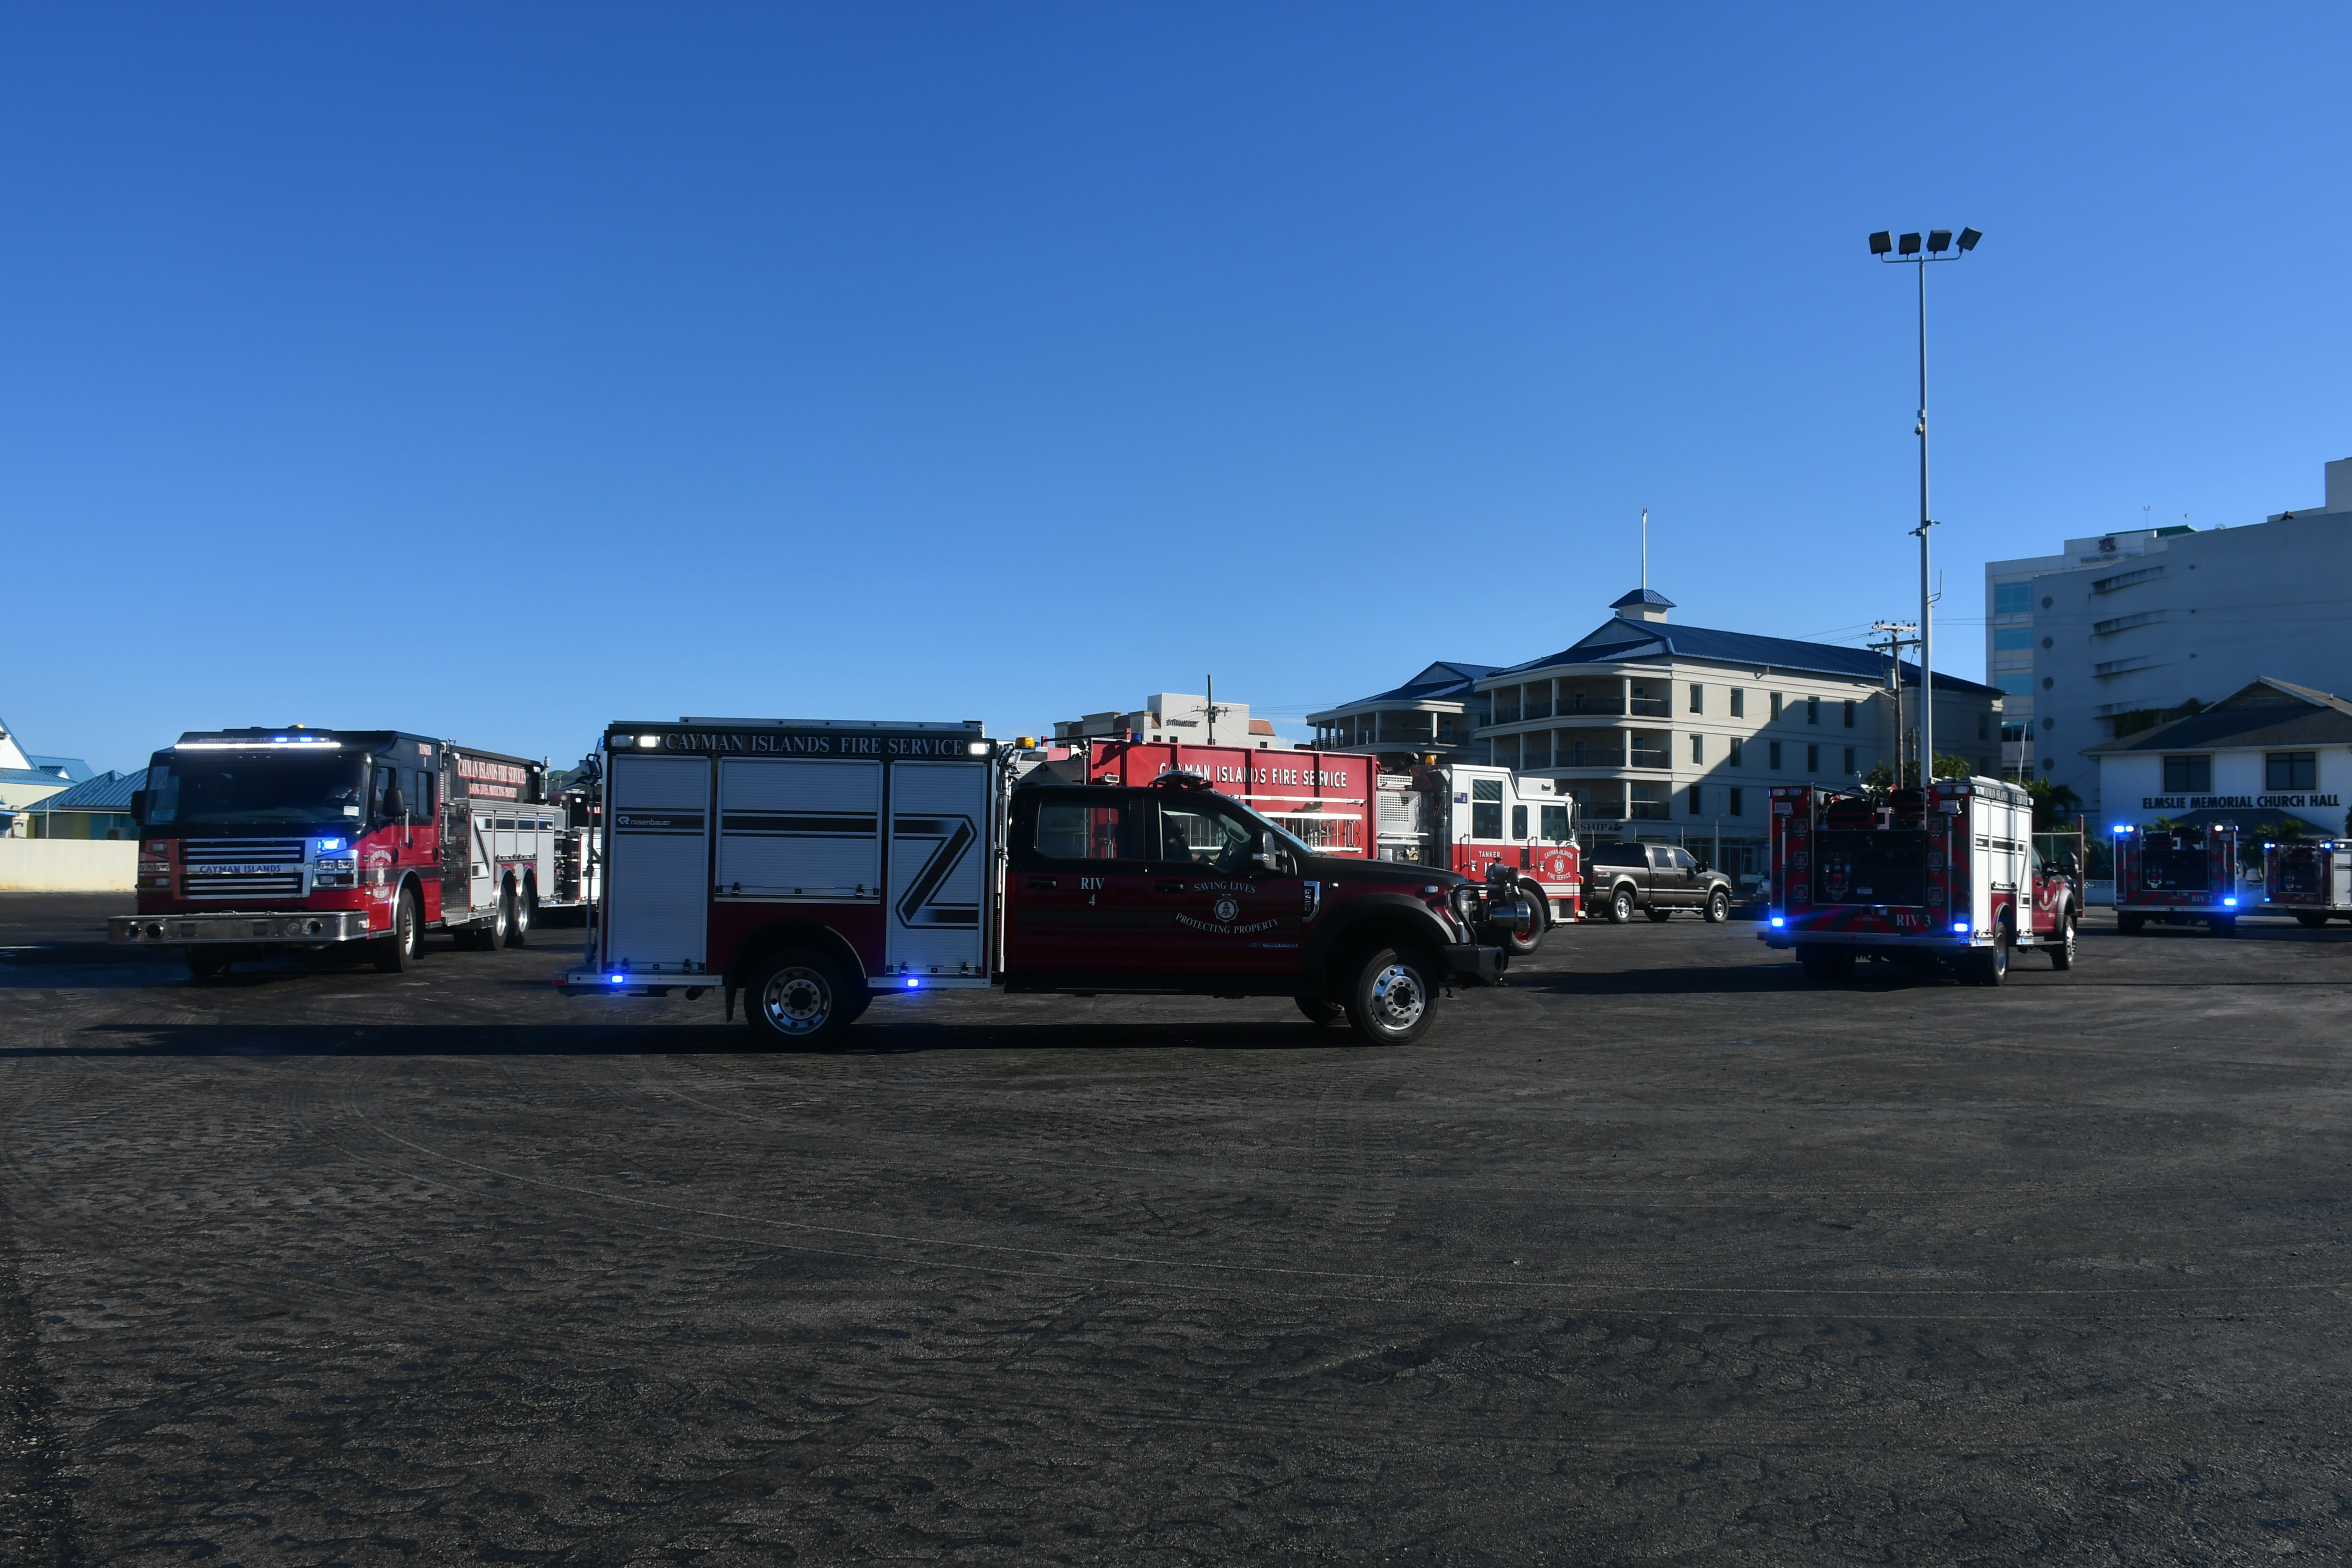 New fire vehicles leave port